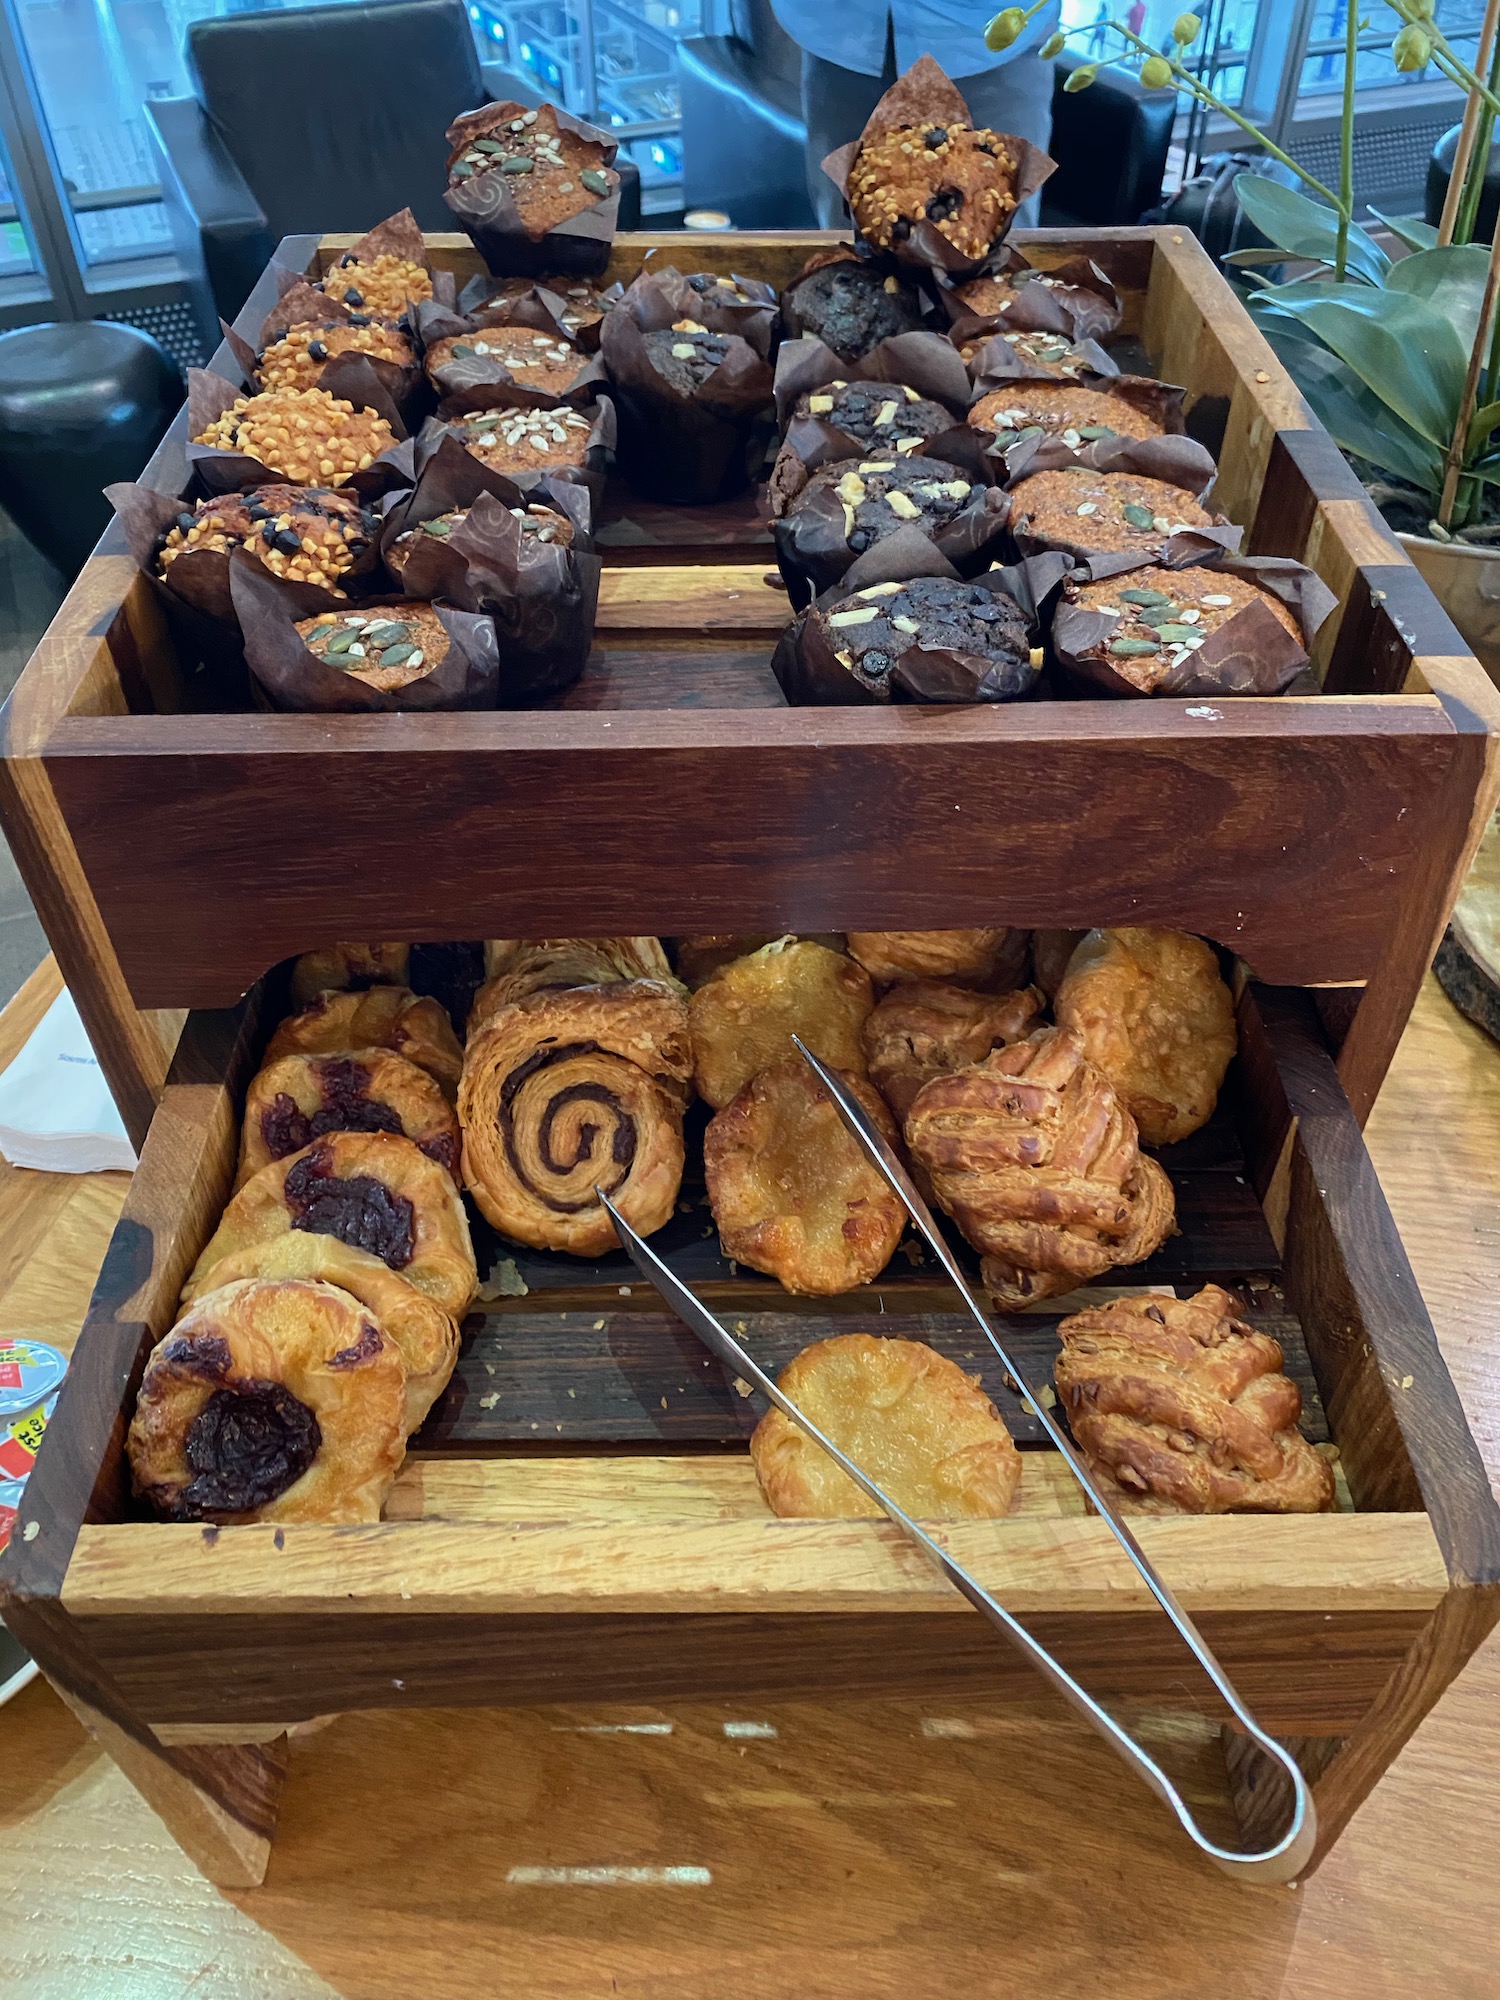 a wooden tray with pastries and pastries